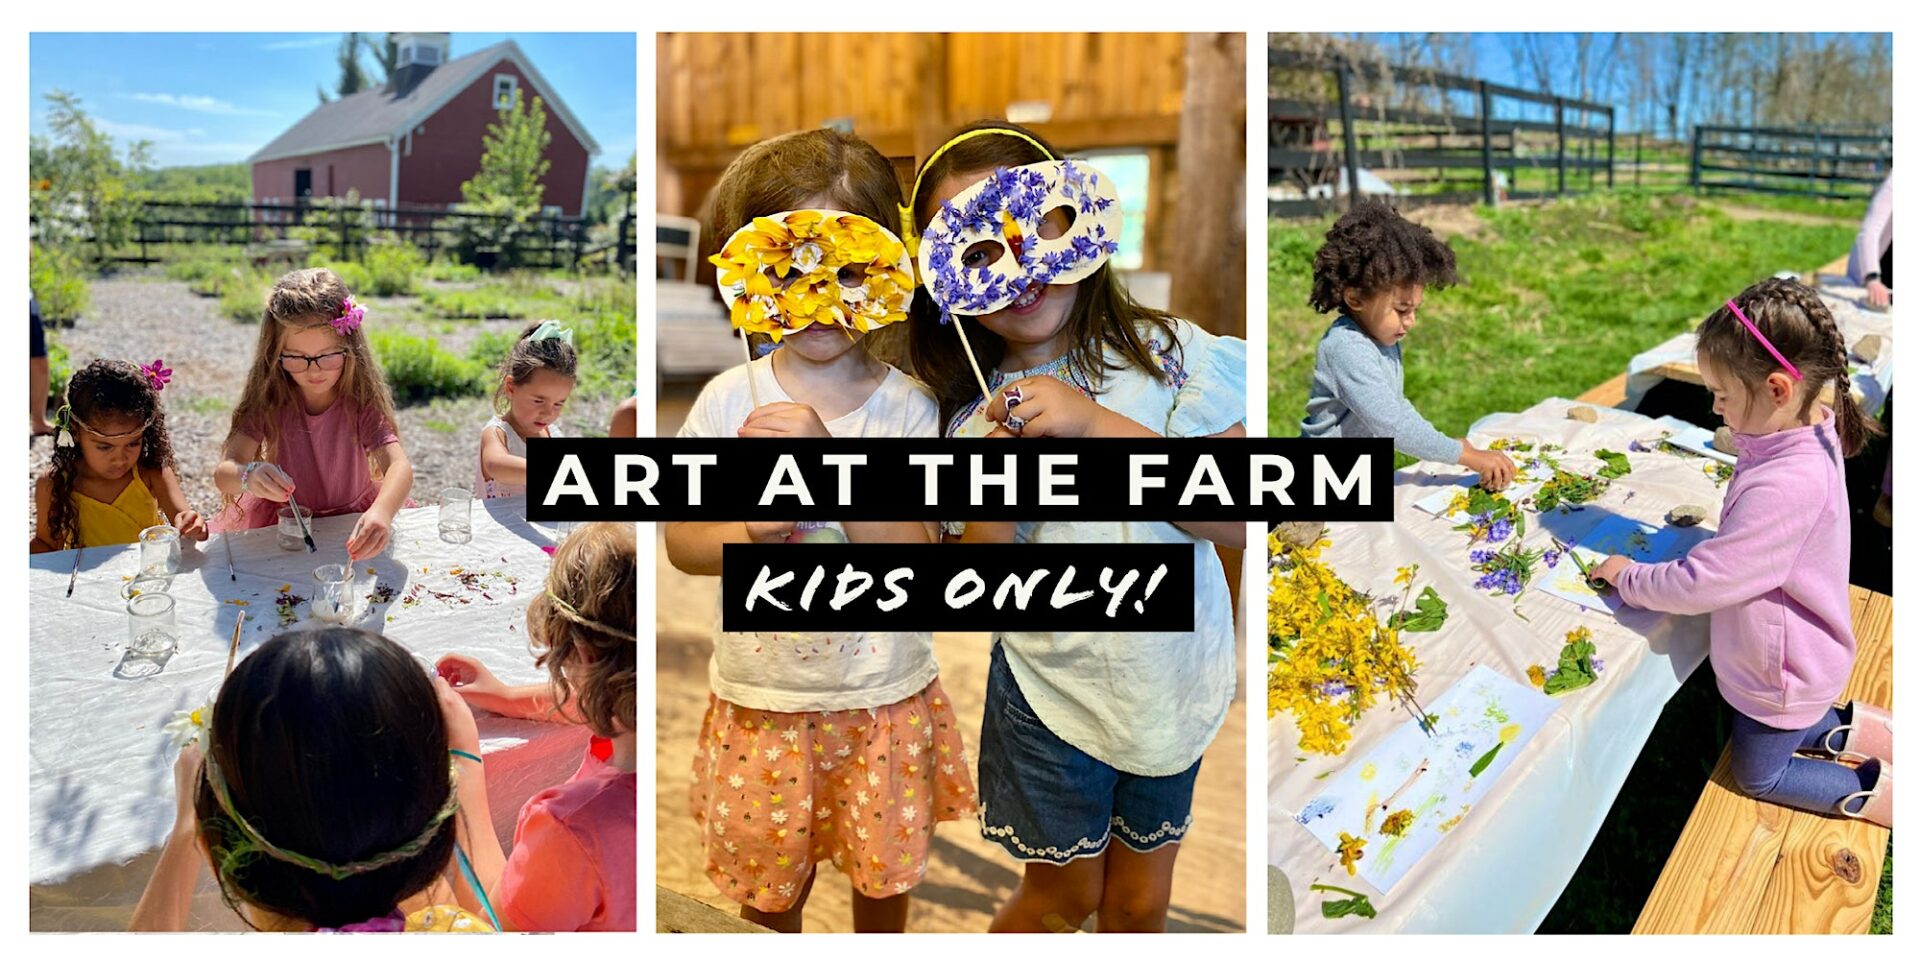 Kids Only! Art at the Farm